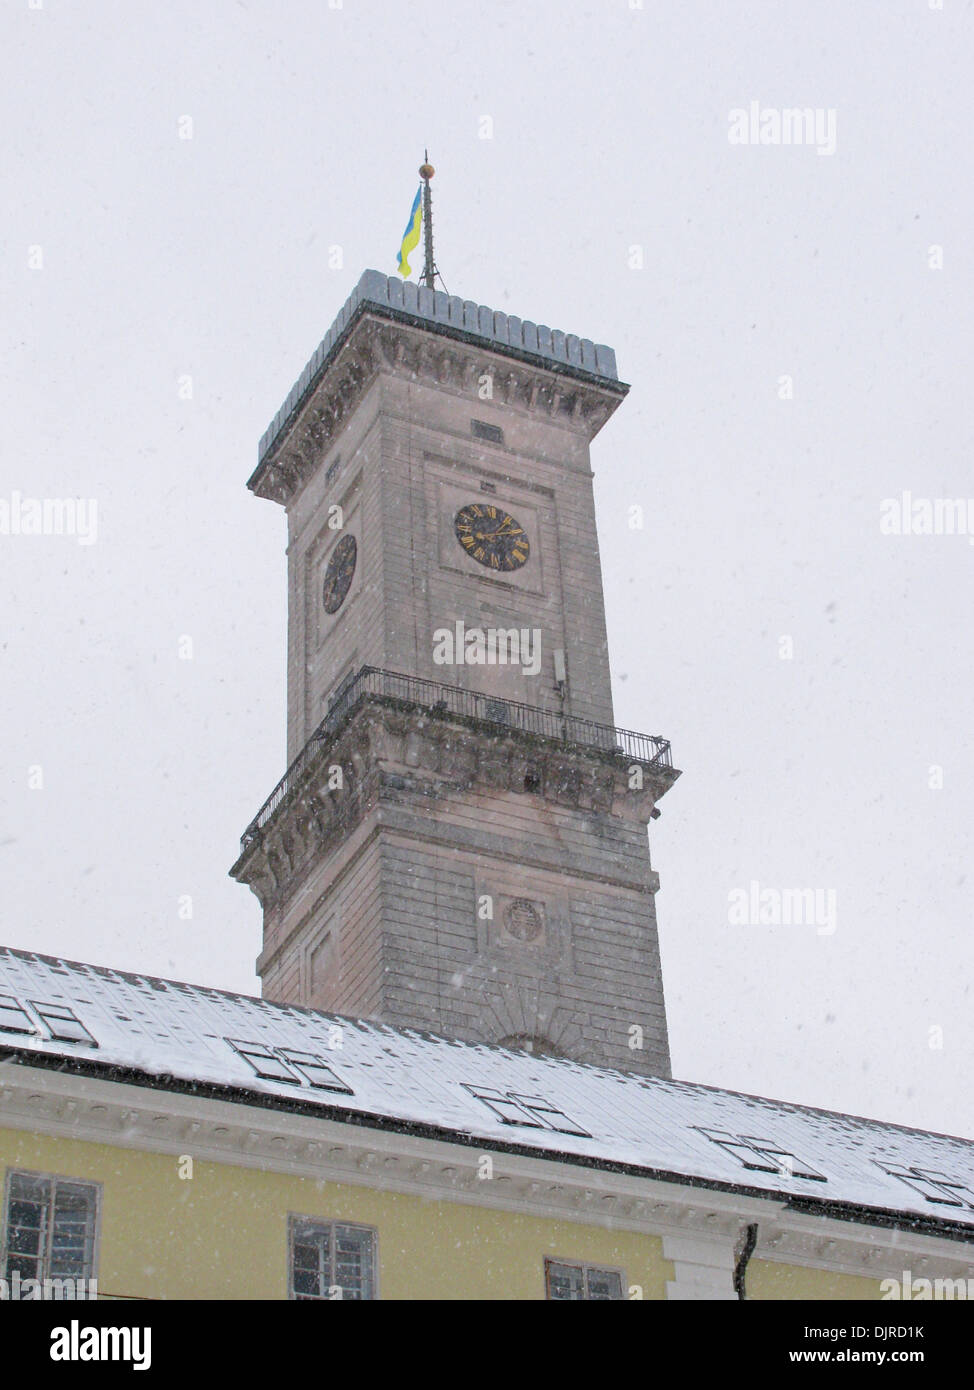 Lviv Town Hall at snowing weather Stock Photo